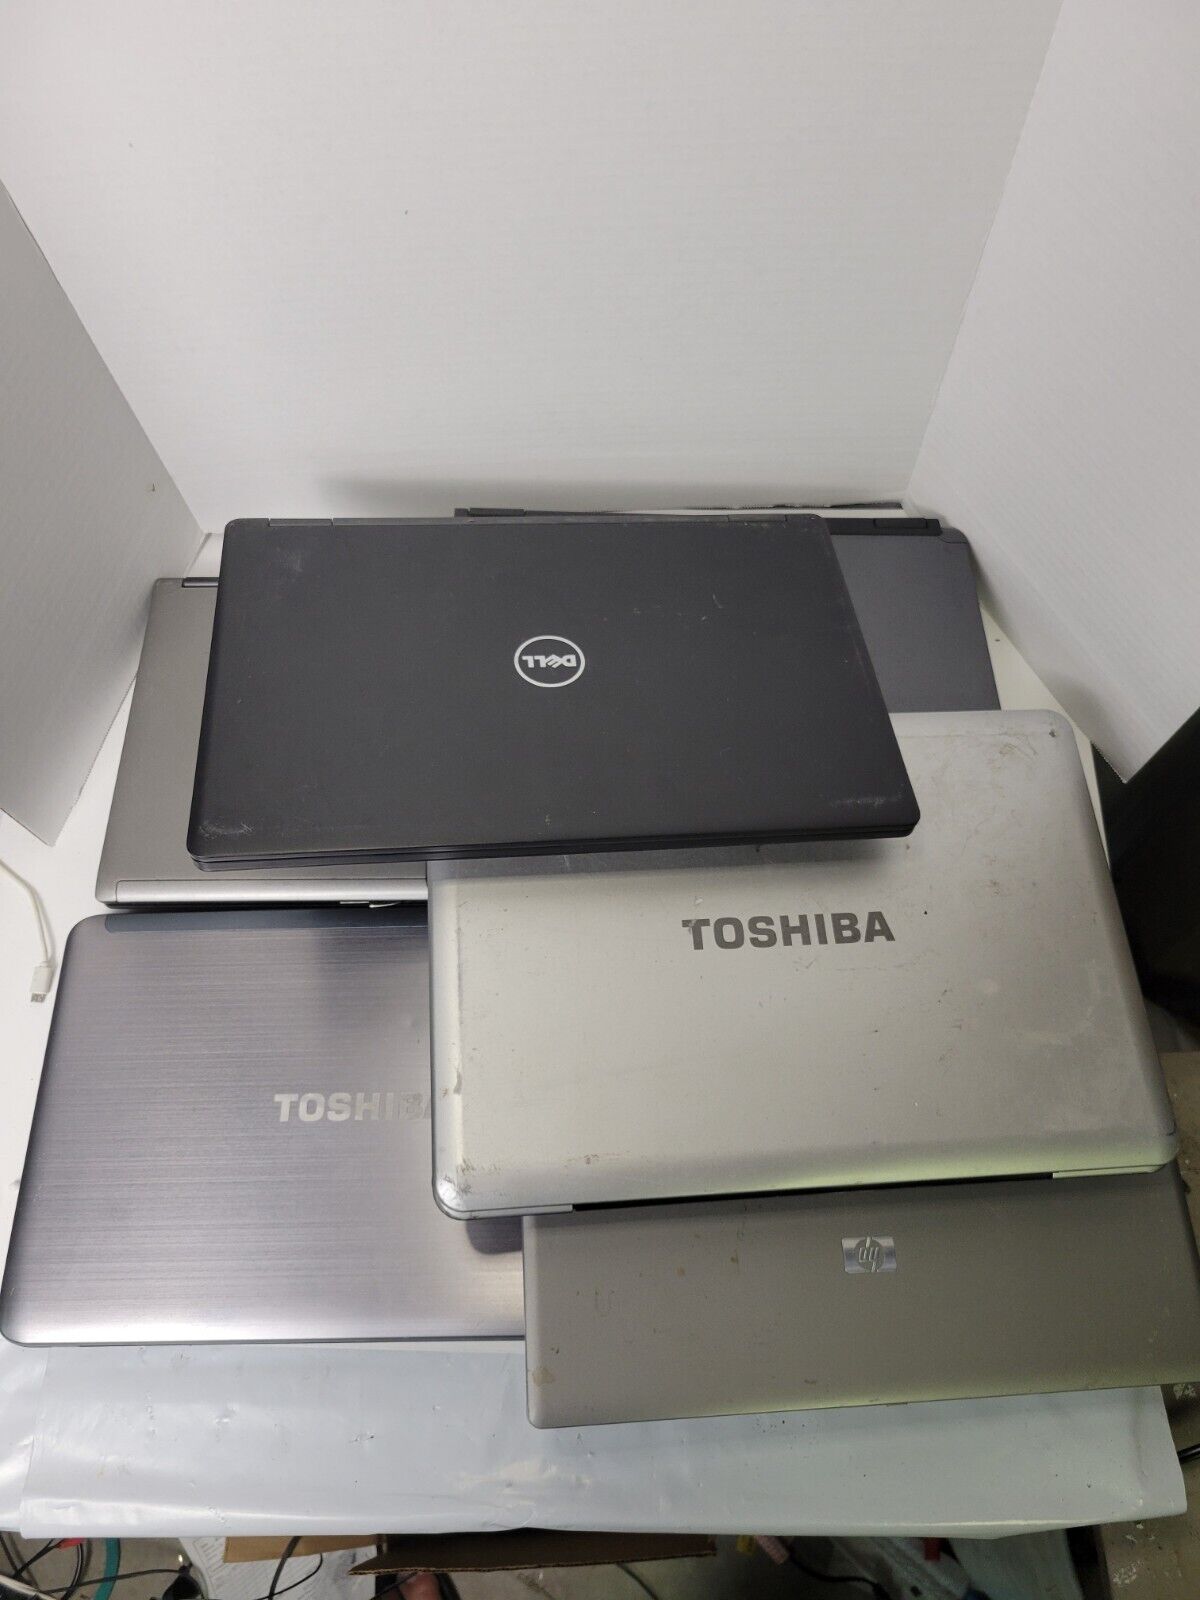 Lot of 6 Laptops Dell, HP And Toshiba, Some Working Some Not Working.